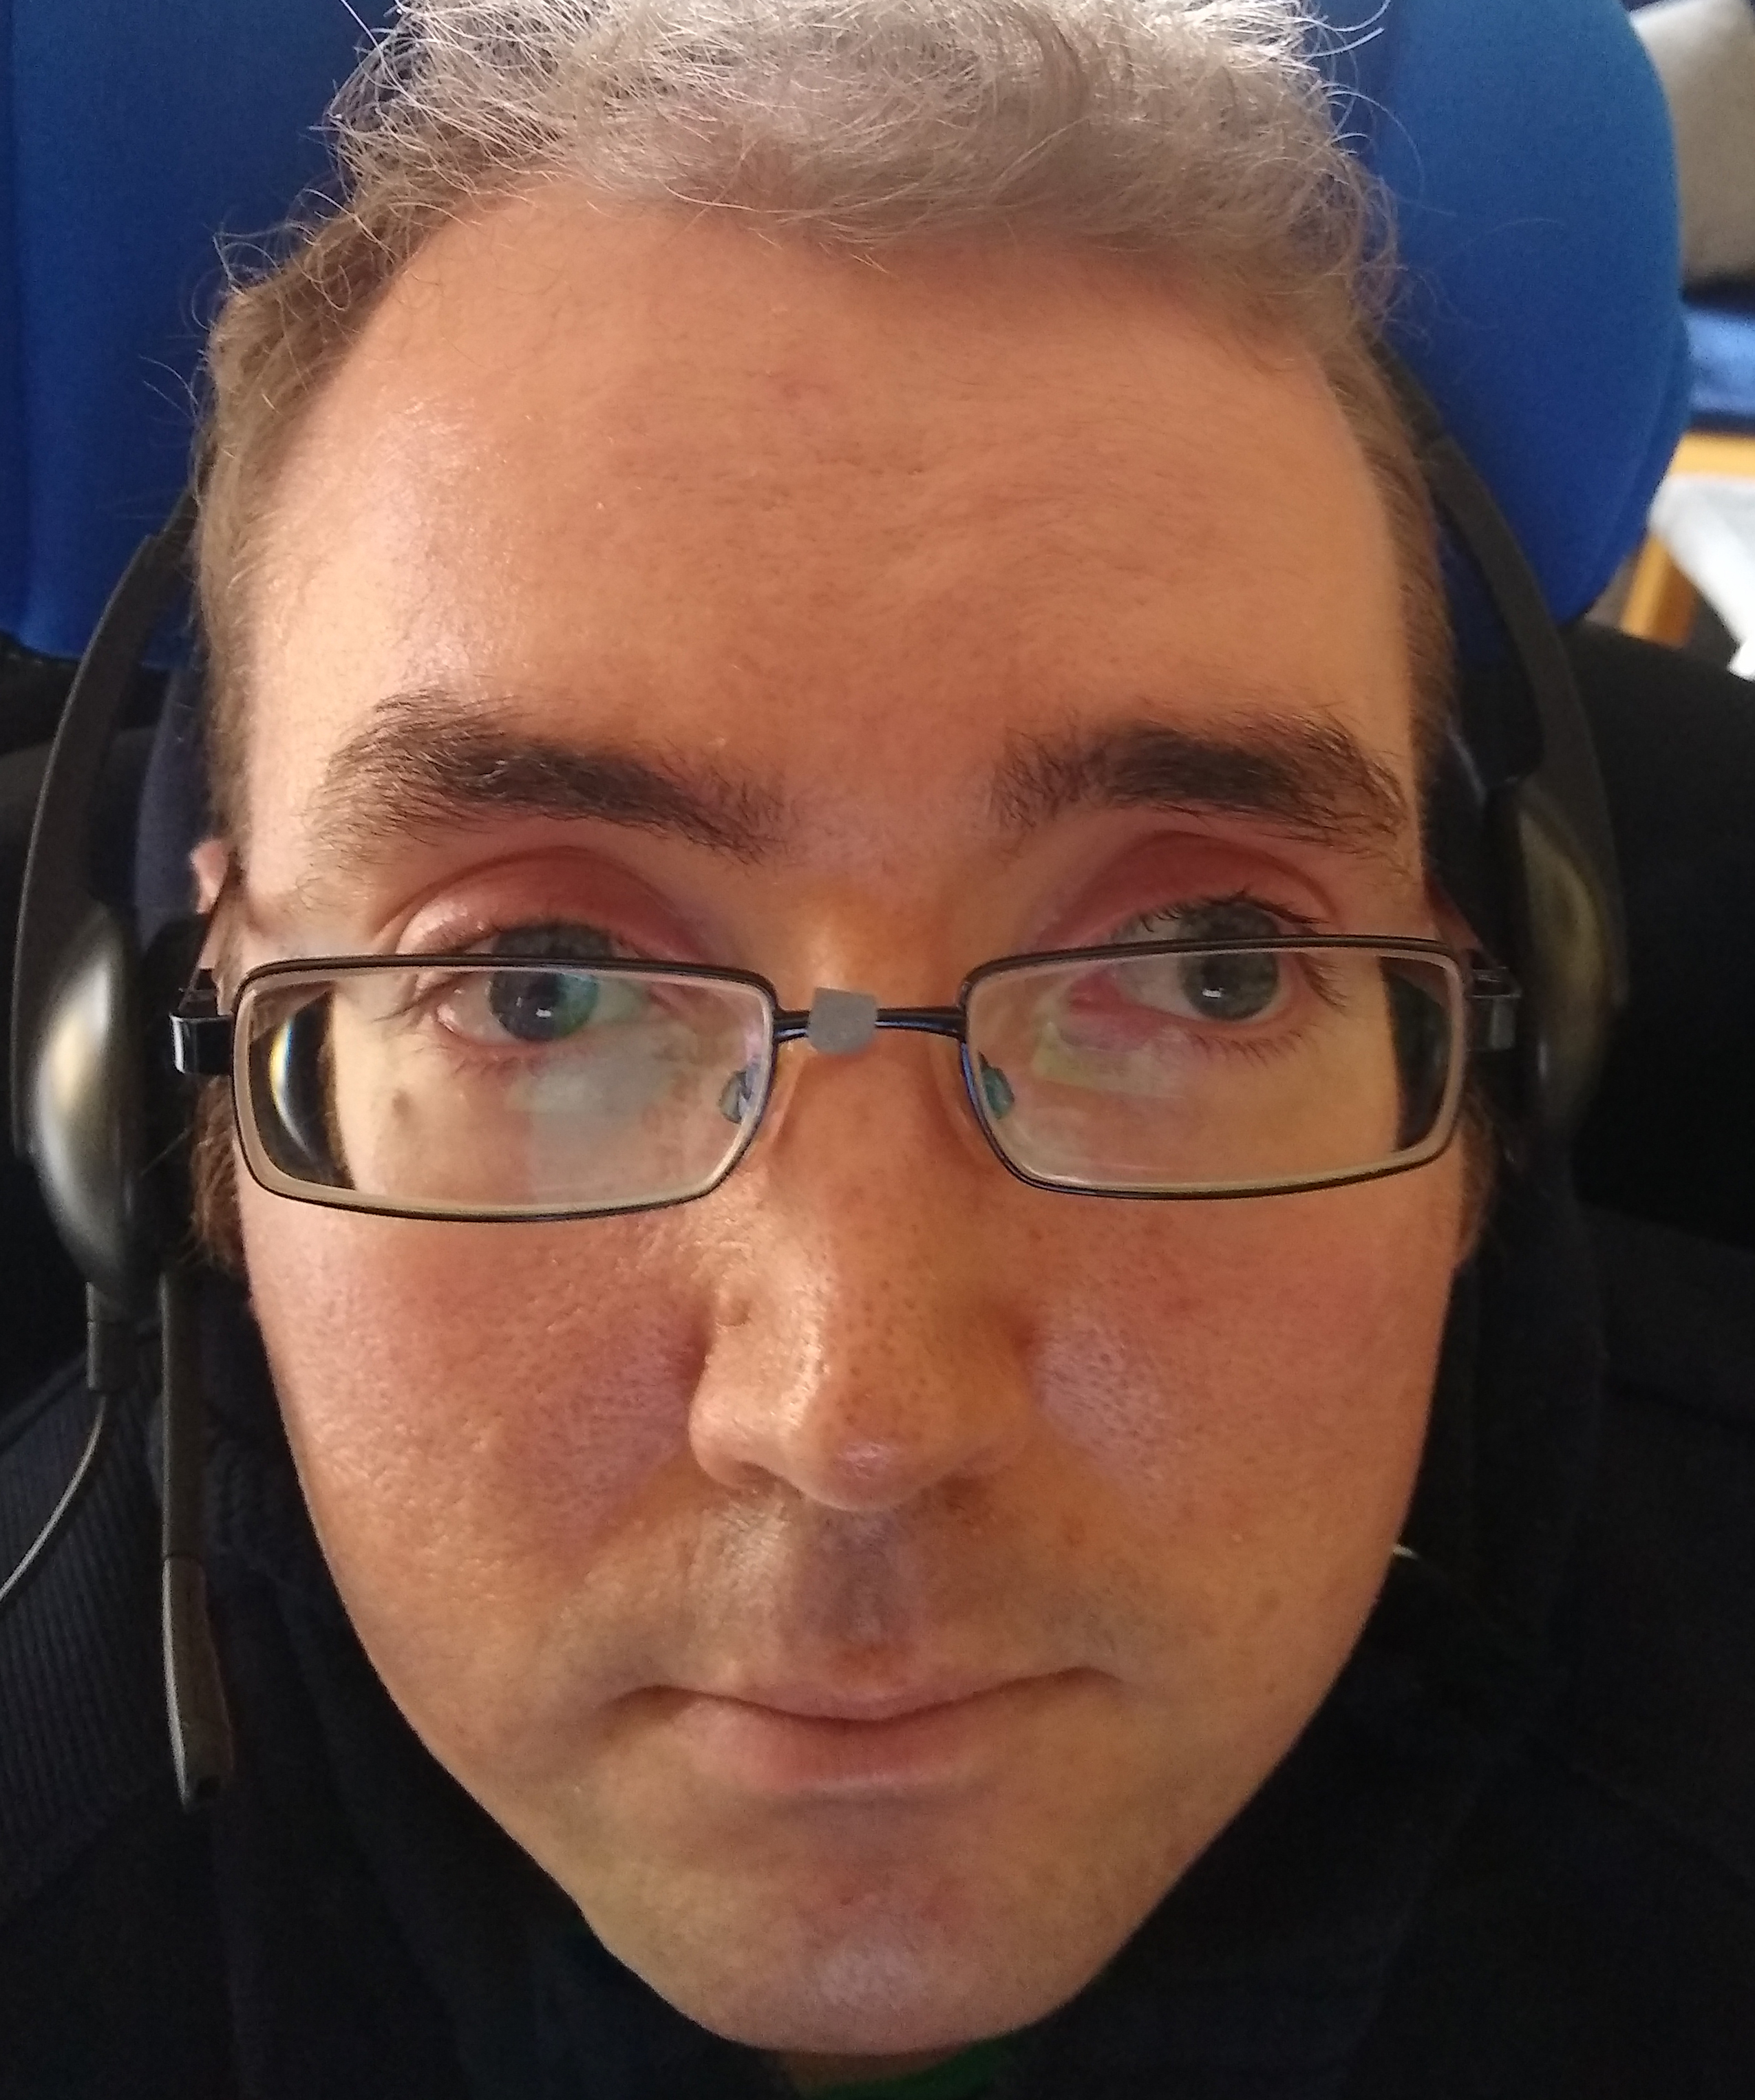 A close-up of a man's face wearing glasses and with the left eye pointing outwards and the right eye centred